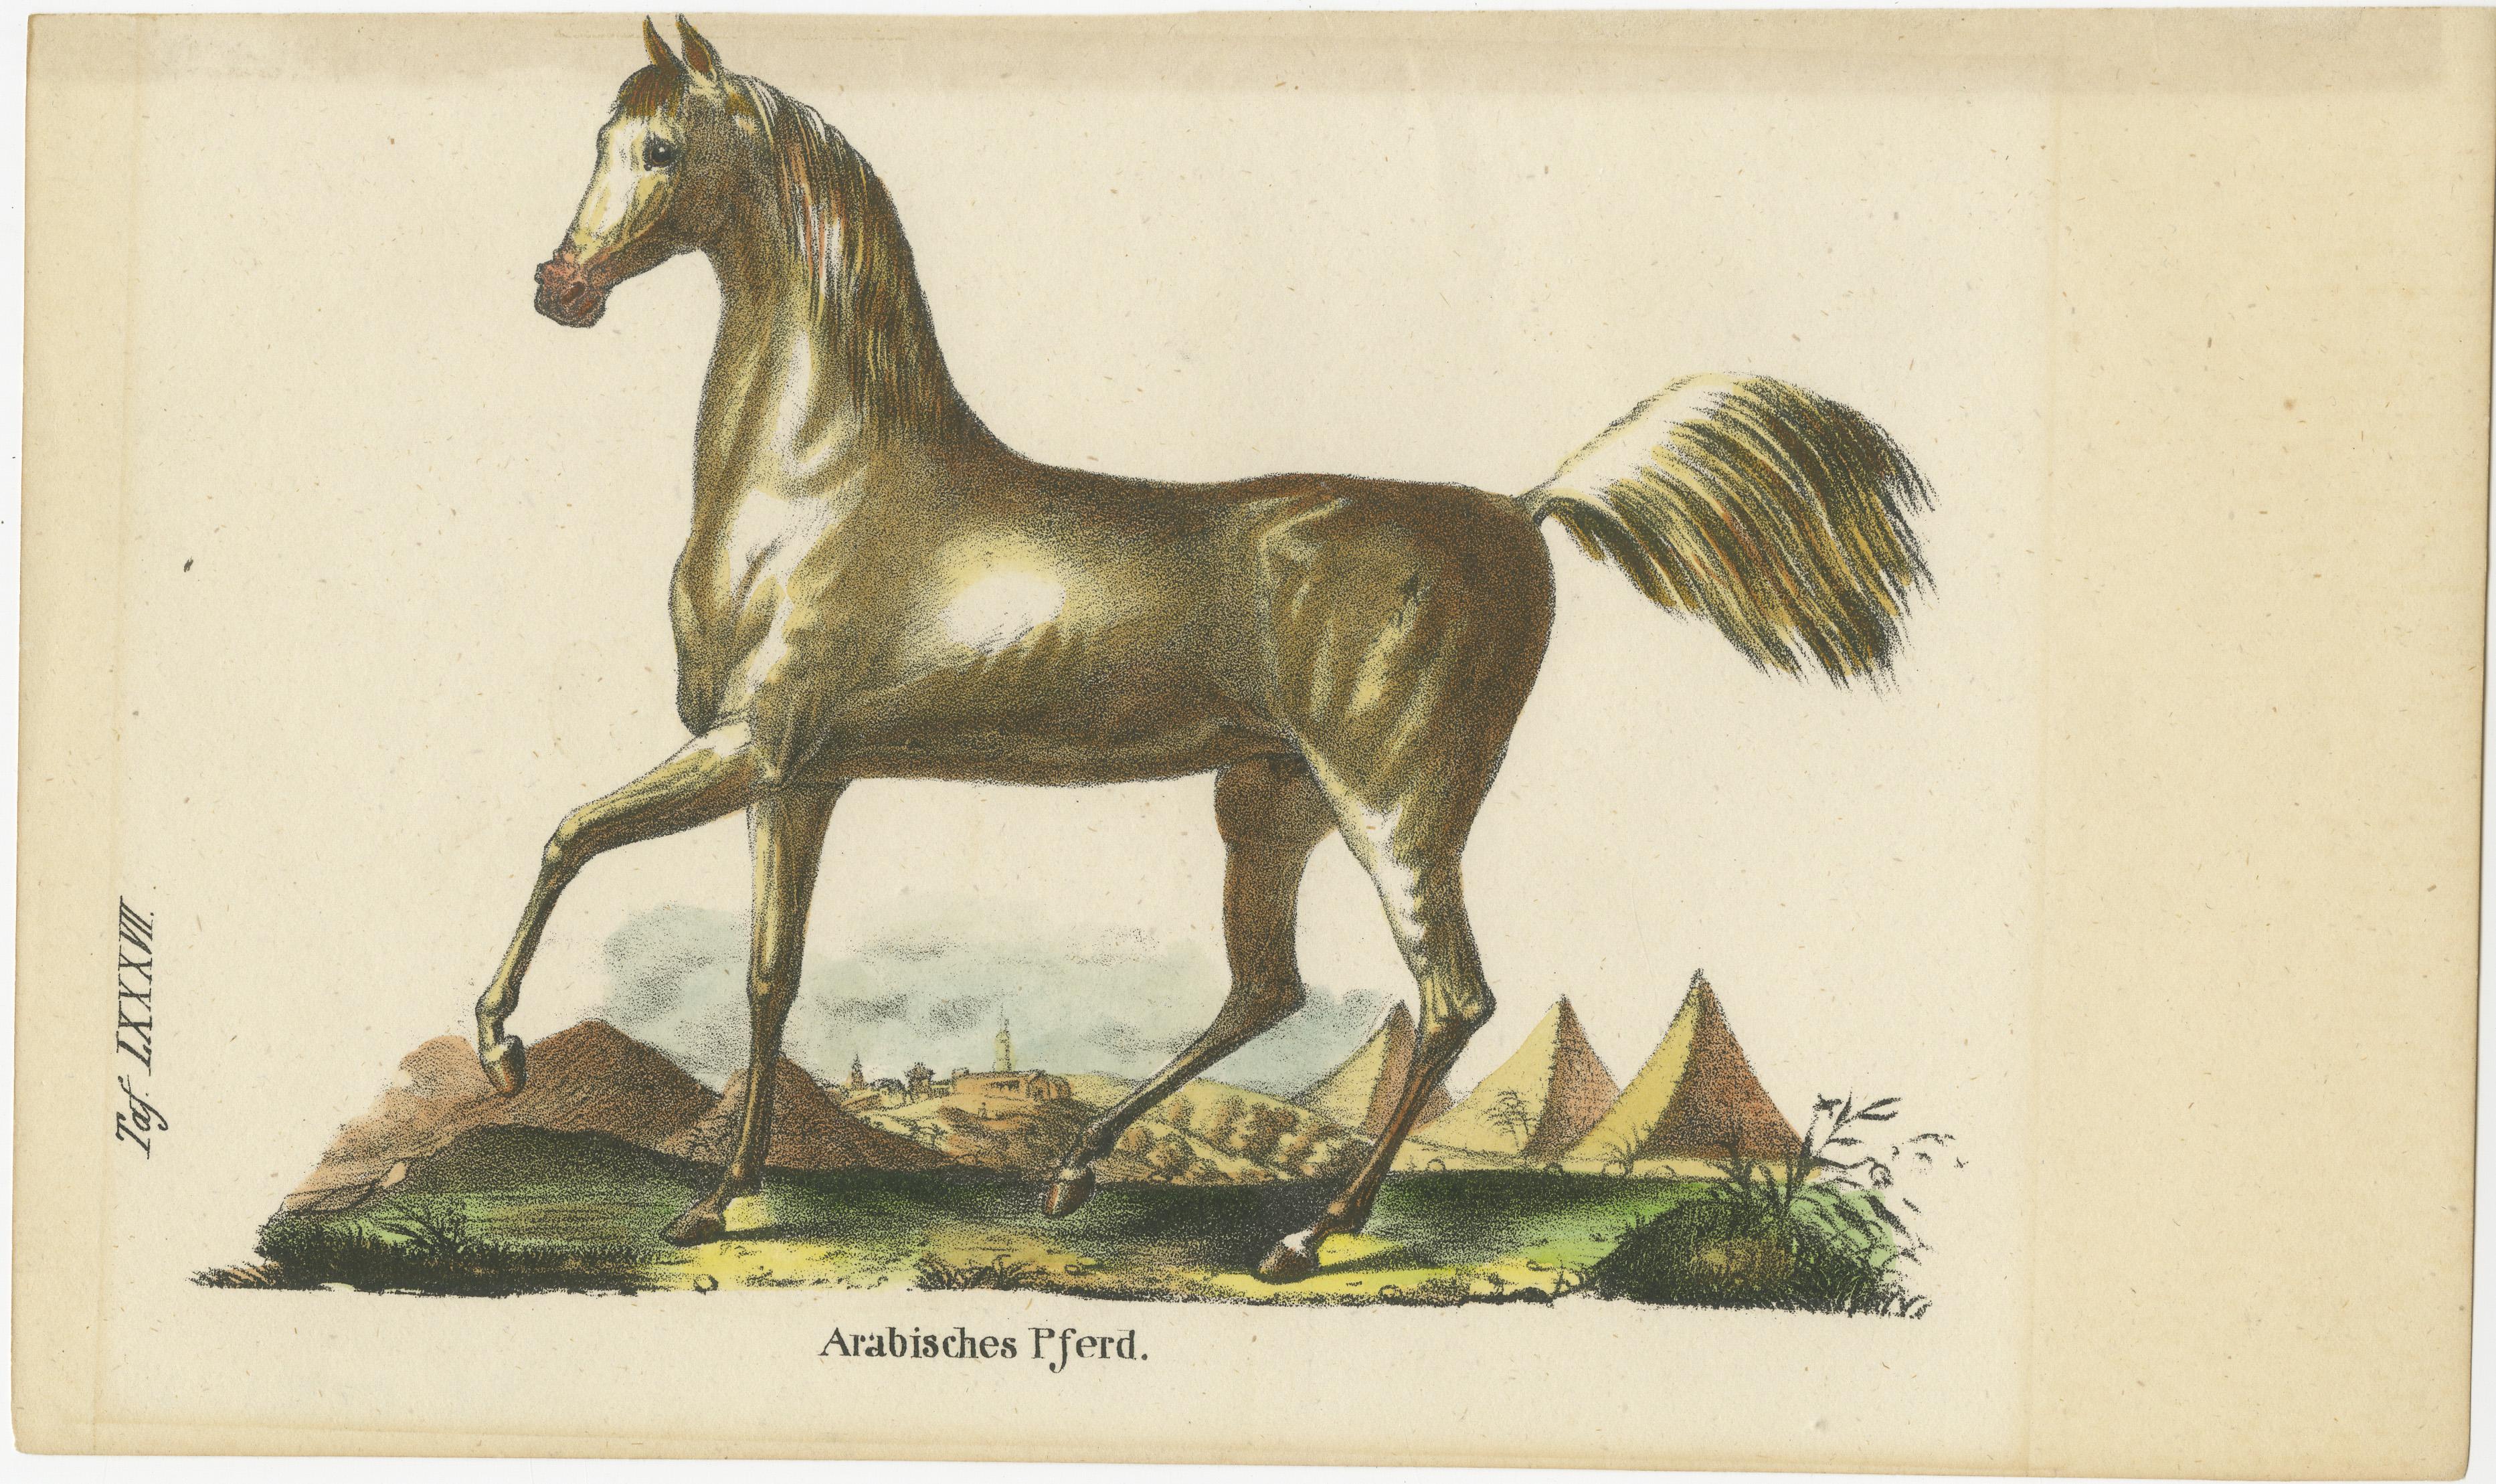 Antique print titled 'Arabisches Pferd'. Old print of an Arabian horse. Source unknown, to be determined. Published circa 1880.